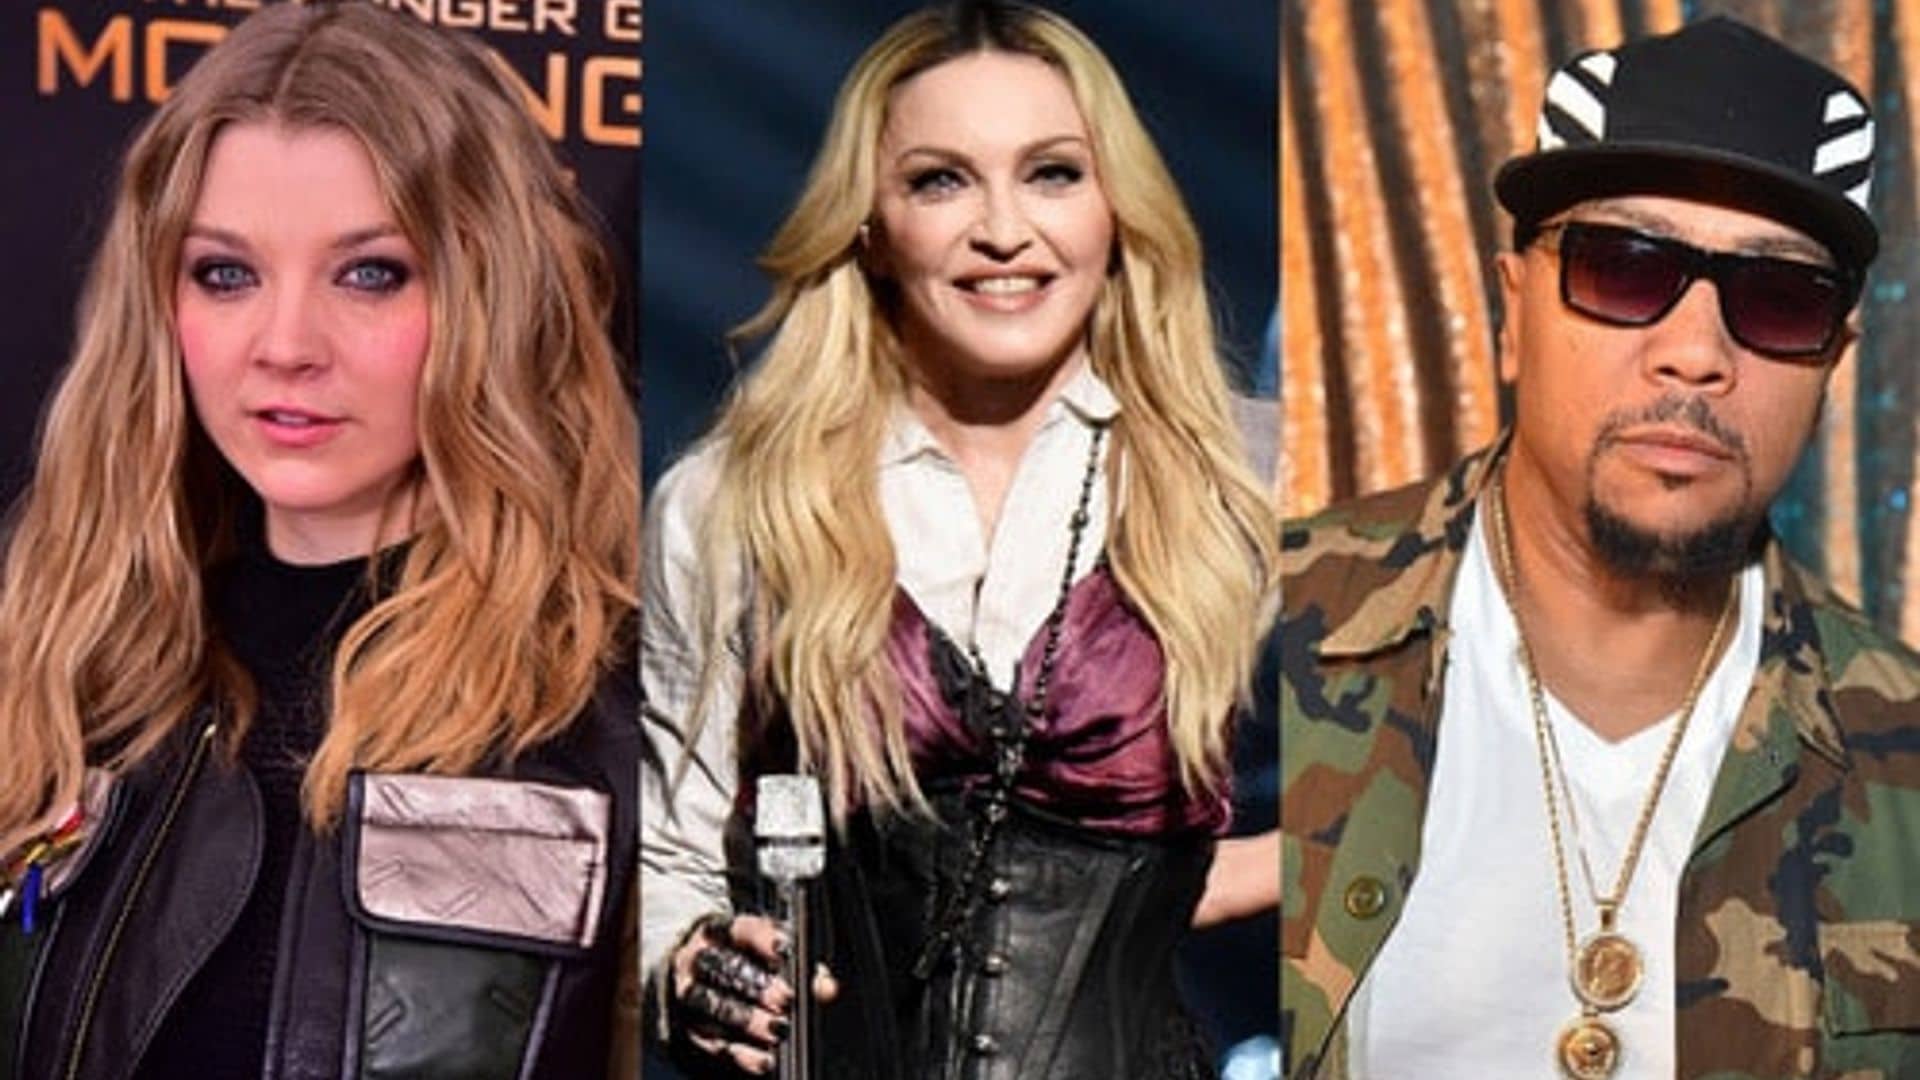 Natalie Dormer and Timbaland both talk about working with 'real boss' Madonna